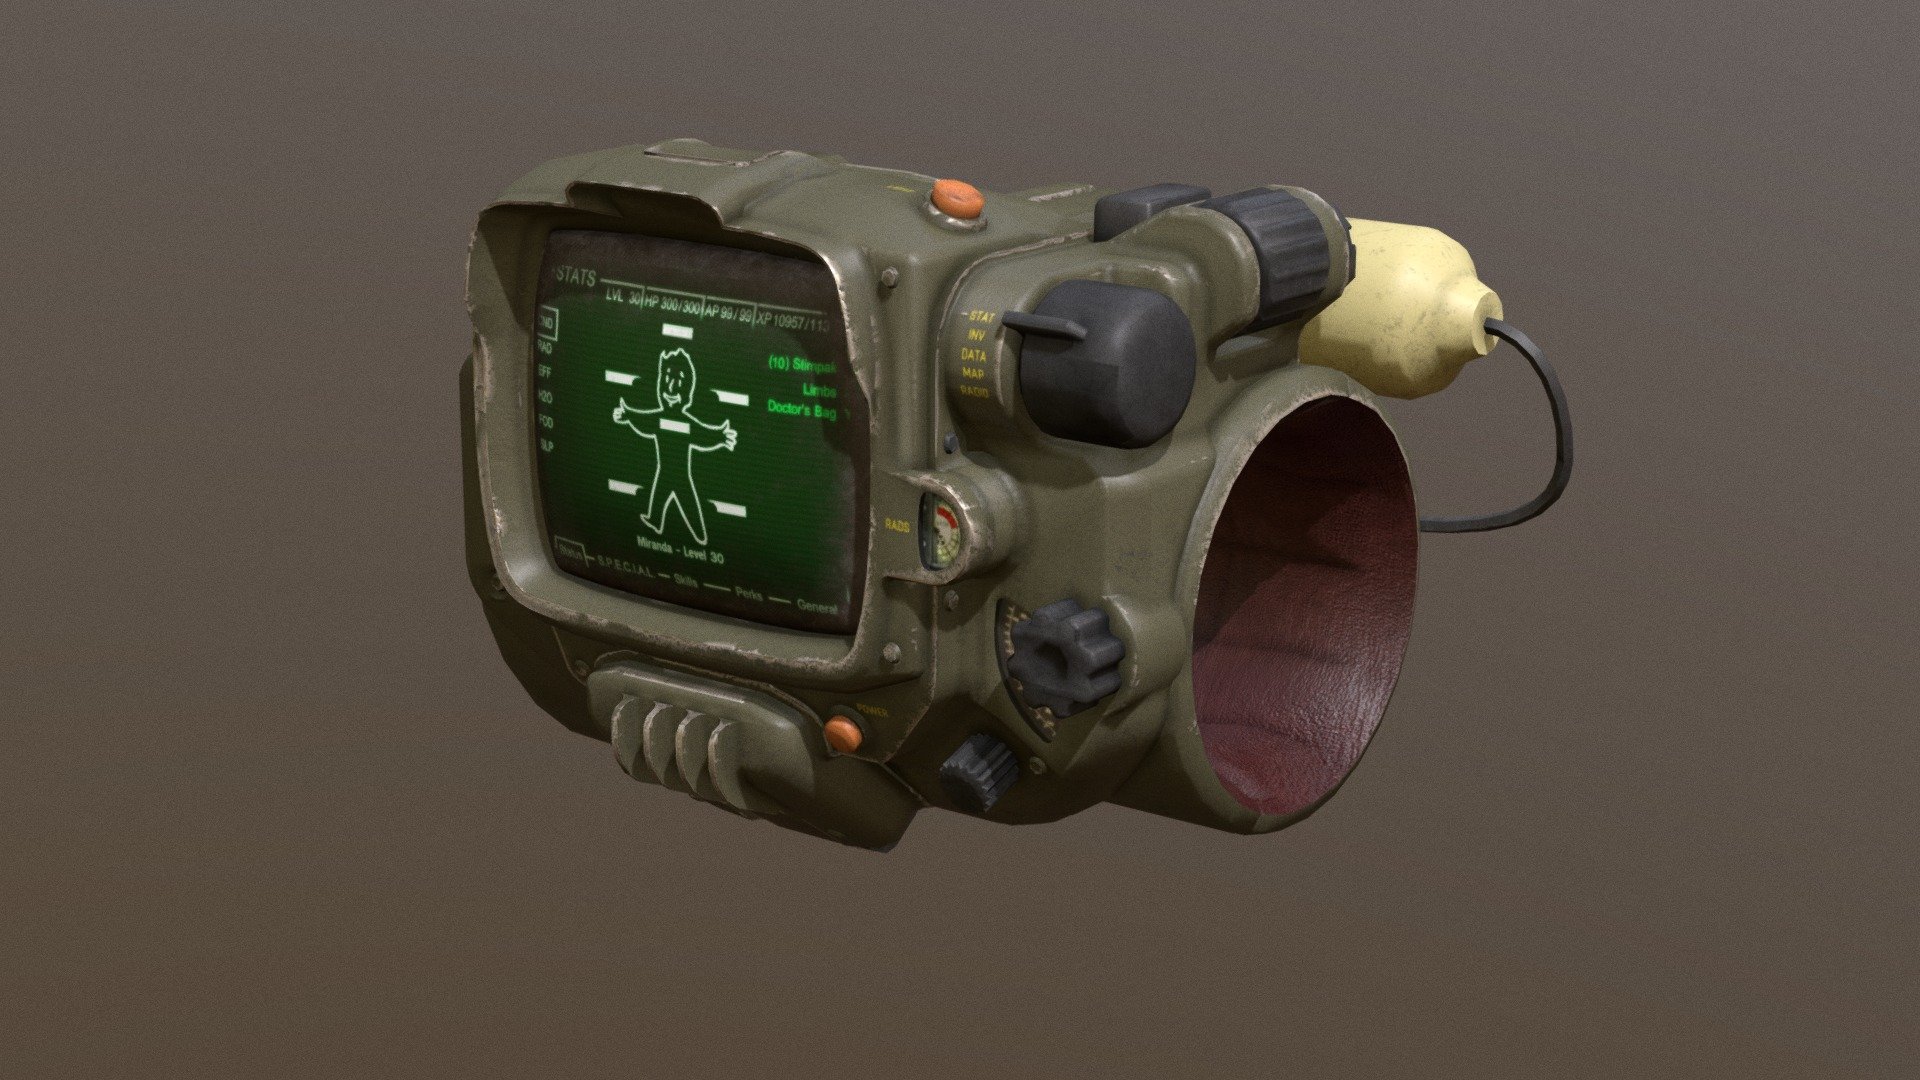 Pip-Boy 3000 Mark IV
Game ready model for unreal, unity engine. For scenes, videos, games.
4k PBR  textures in substance painter. Albedo, Metalic + rougness, Normal map. 
gizmos ready. You need somting ? PM me =)
3D printing ready - Pip-Boy 3000 Mark IV - Buy Royalty Free 3D model by Thomas Binder (@bindertom61) 3d model